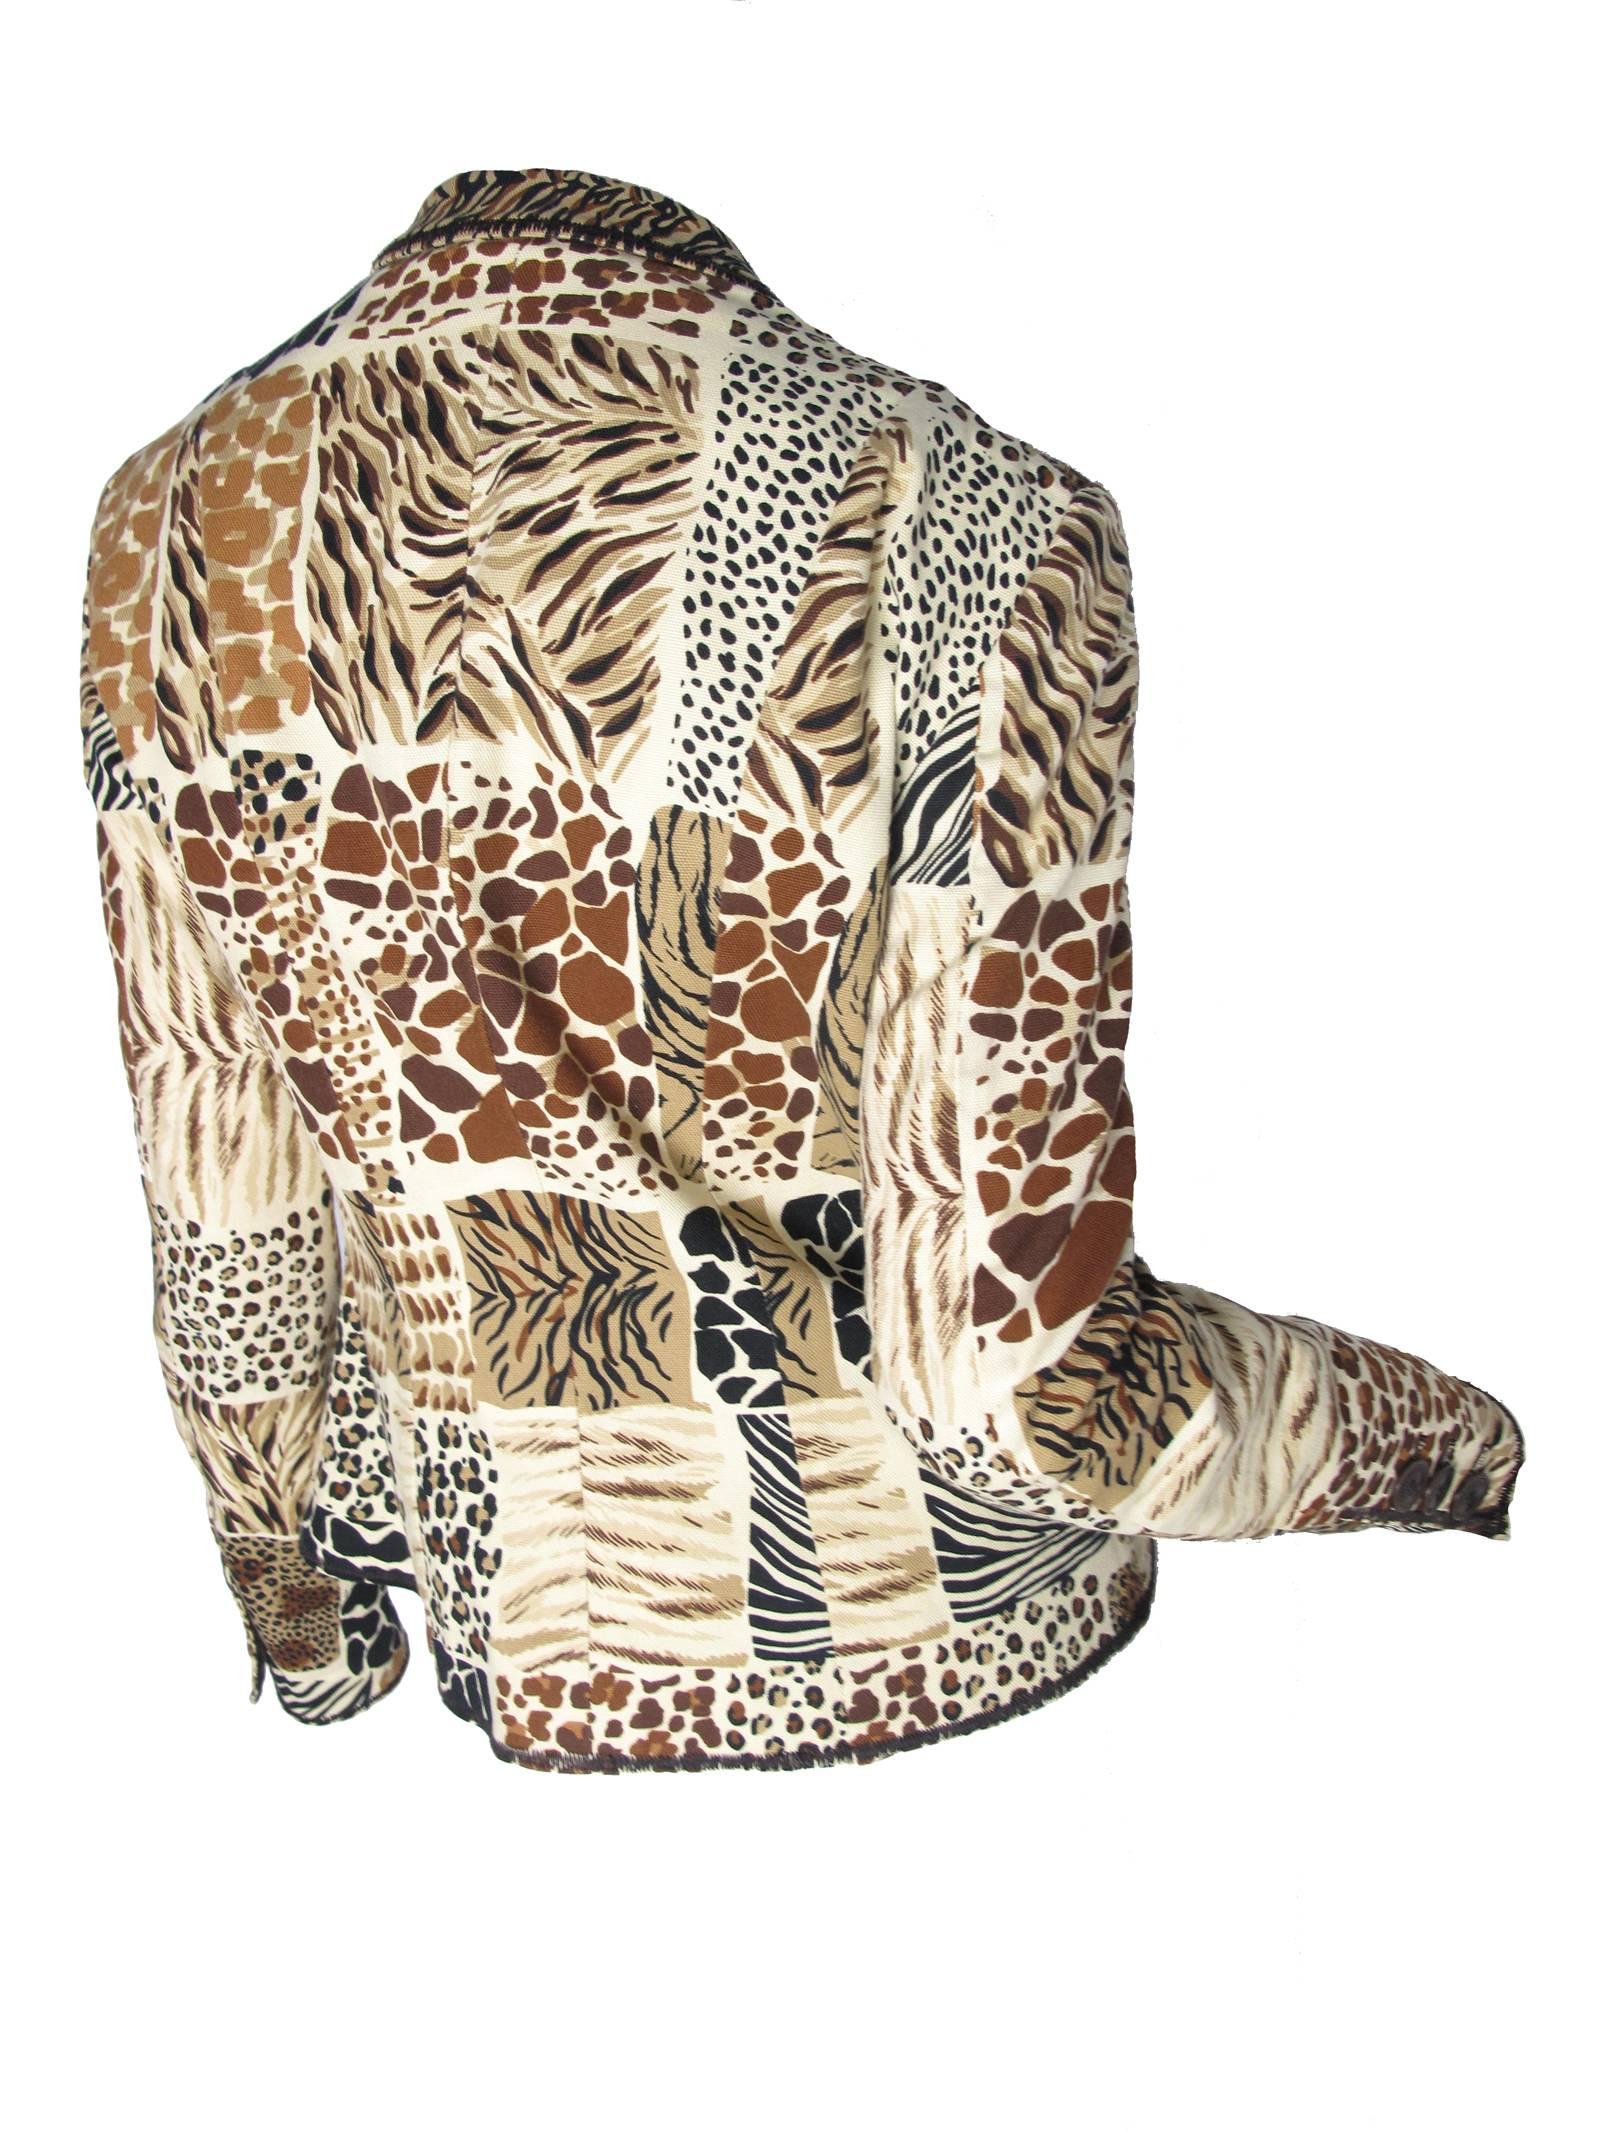 Moschino Cheap and Chic animal printed cotton jacket.  Buttons down front. Condition: Excellent.  Size 10 
38